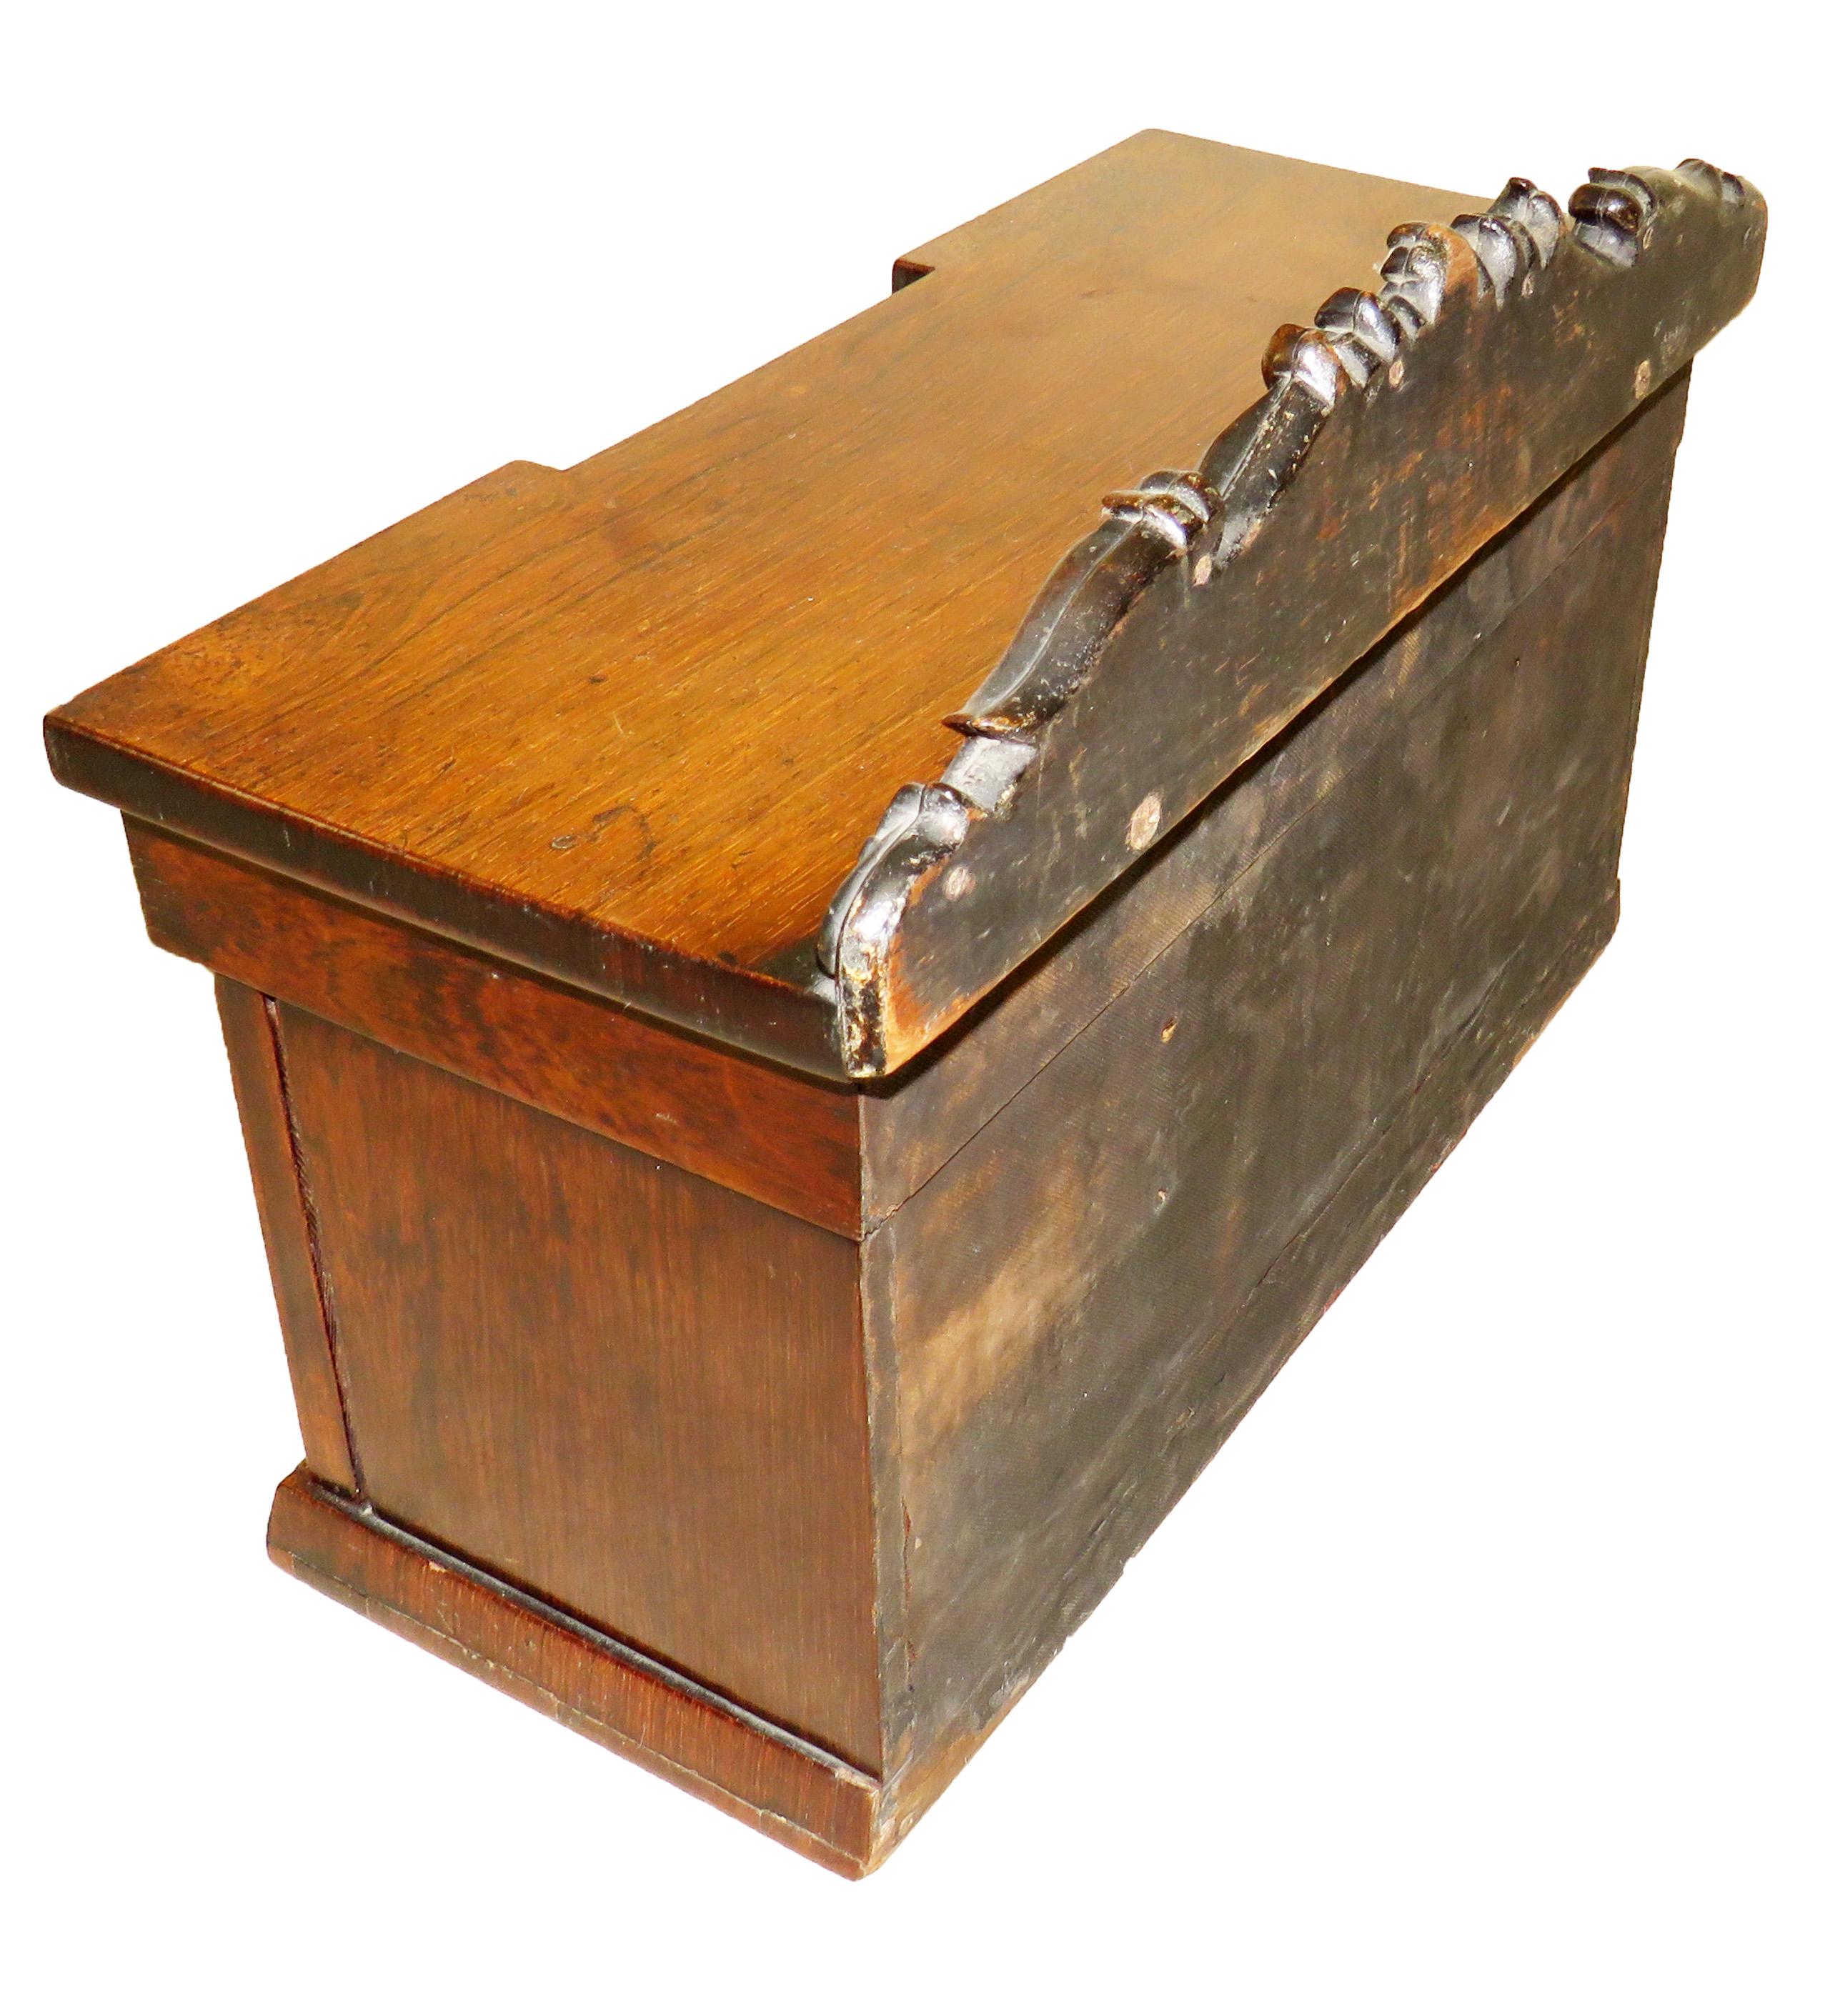 A Charming Late Regency Period Rosewood Tea Caddy, In
The Form Of A Miniature Pedestal Sideboard, Having Hinged
Lid Over Concealed Canisters And Central Mixing Bowl Hole 
Raised On Original Plinth Base (lacking key) 

(This rare, elegant and